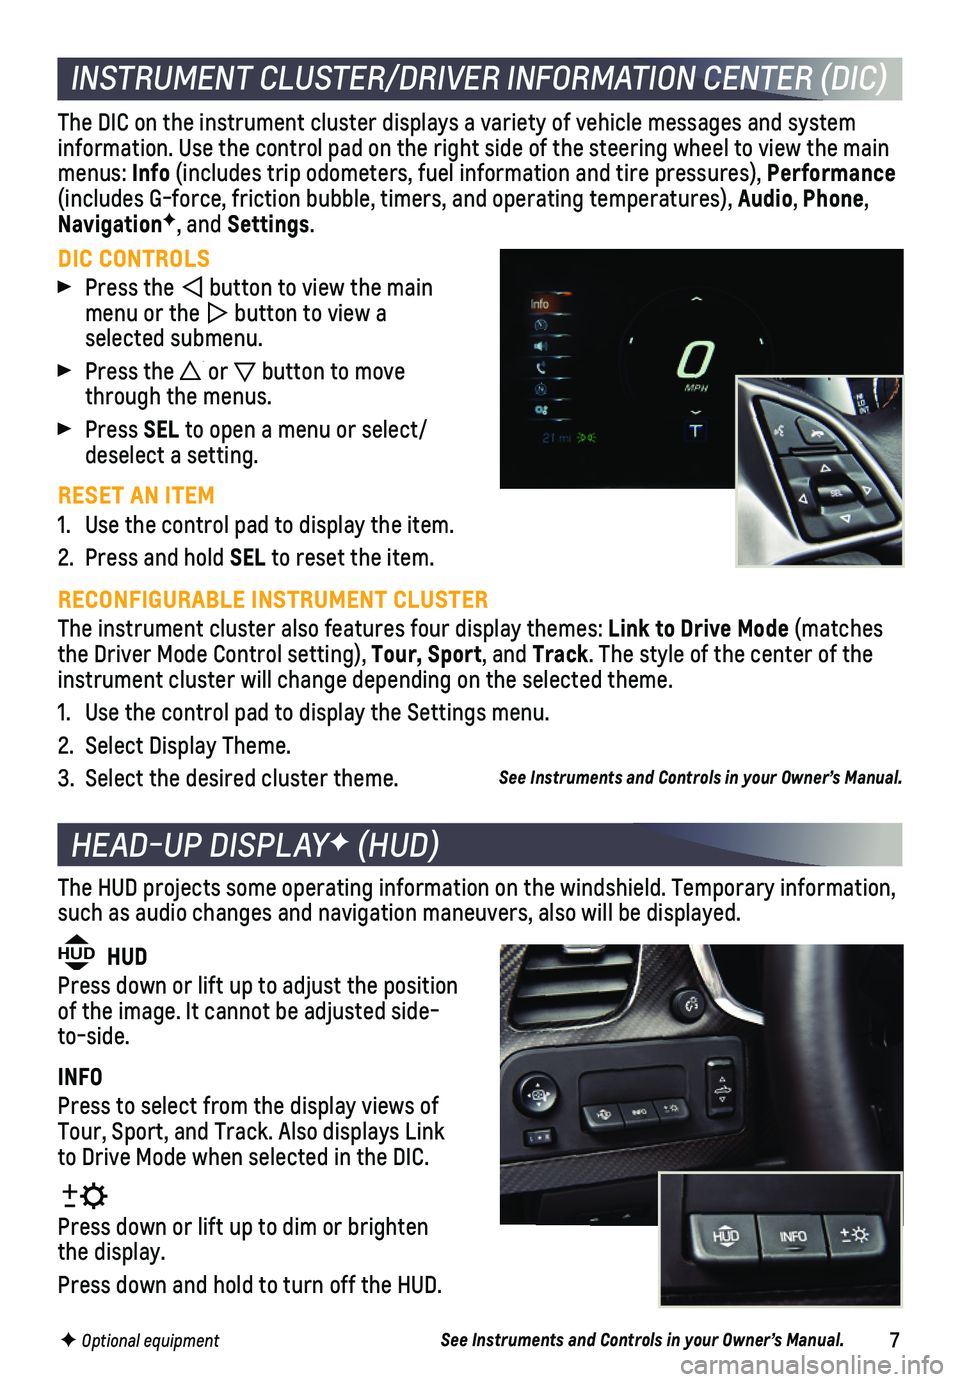 CHEVROLET CORVETTE 2019  Get To Know Guide 7
INSTRUMENT CLUSTER/DRIVER INFORMATION CENTER (DIC)
DIC CONTROLS
 Press the  button to view the main menu or the  button to view a  selected  submenu.
 Press the  or  button to move through the menus